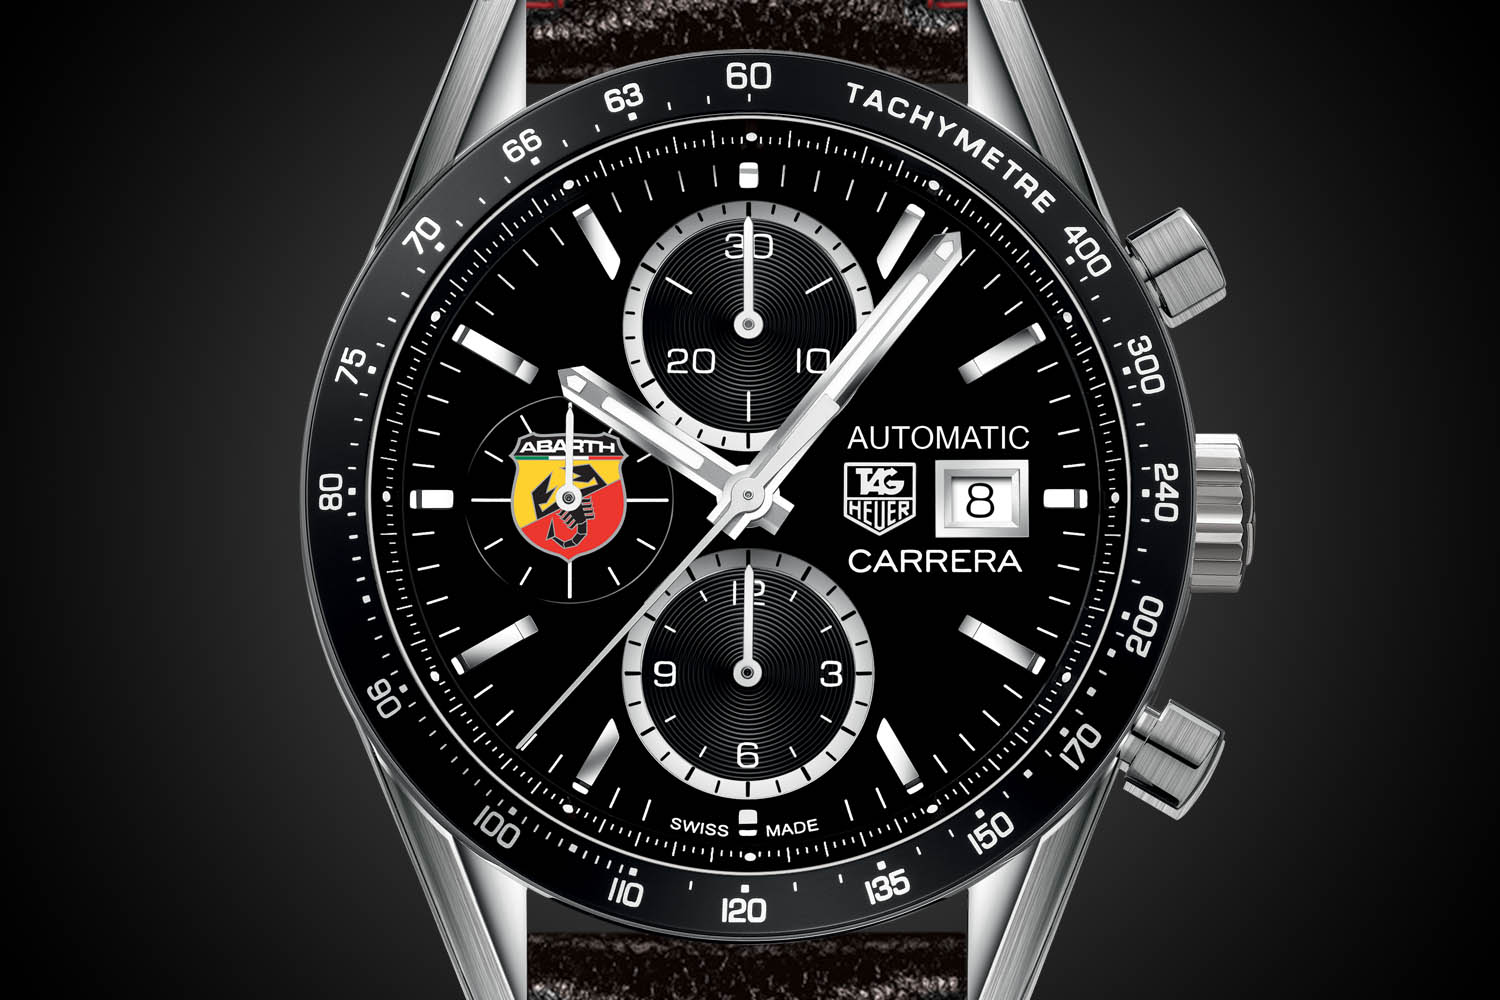 TAG Heuer Carrera Abarth 595 Competizione by TAG Heuer - 2